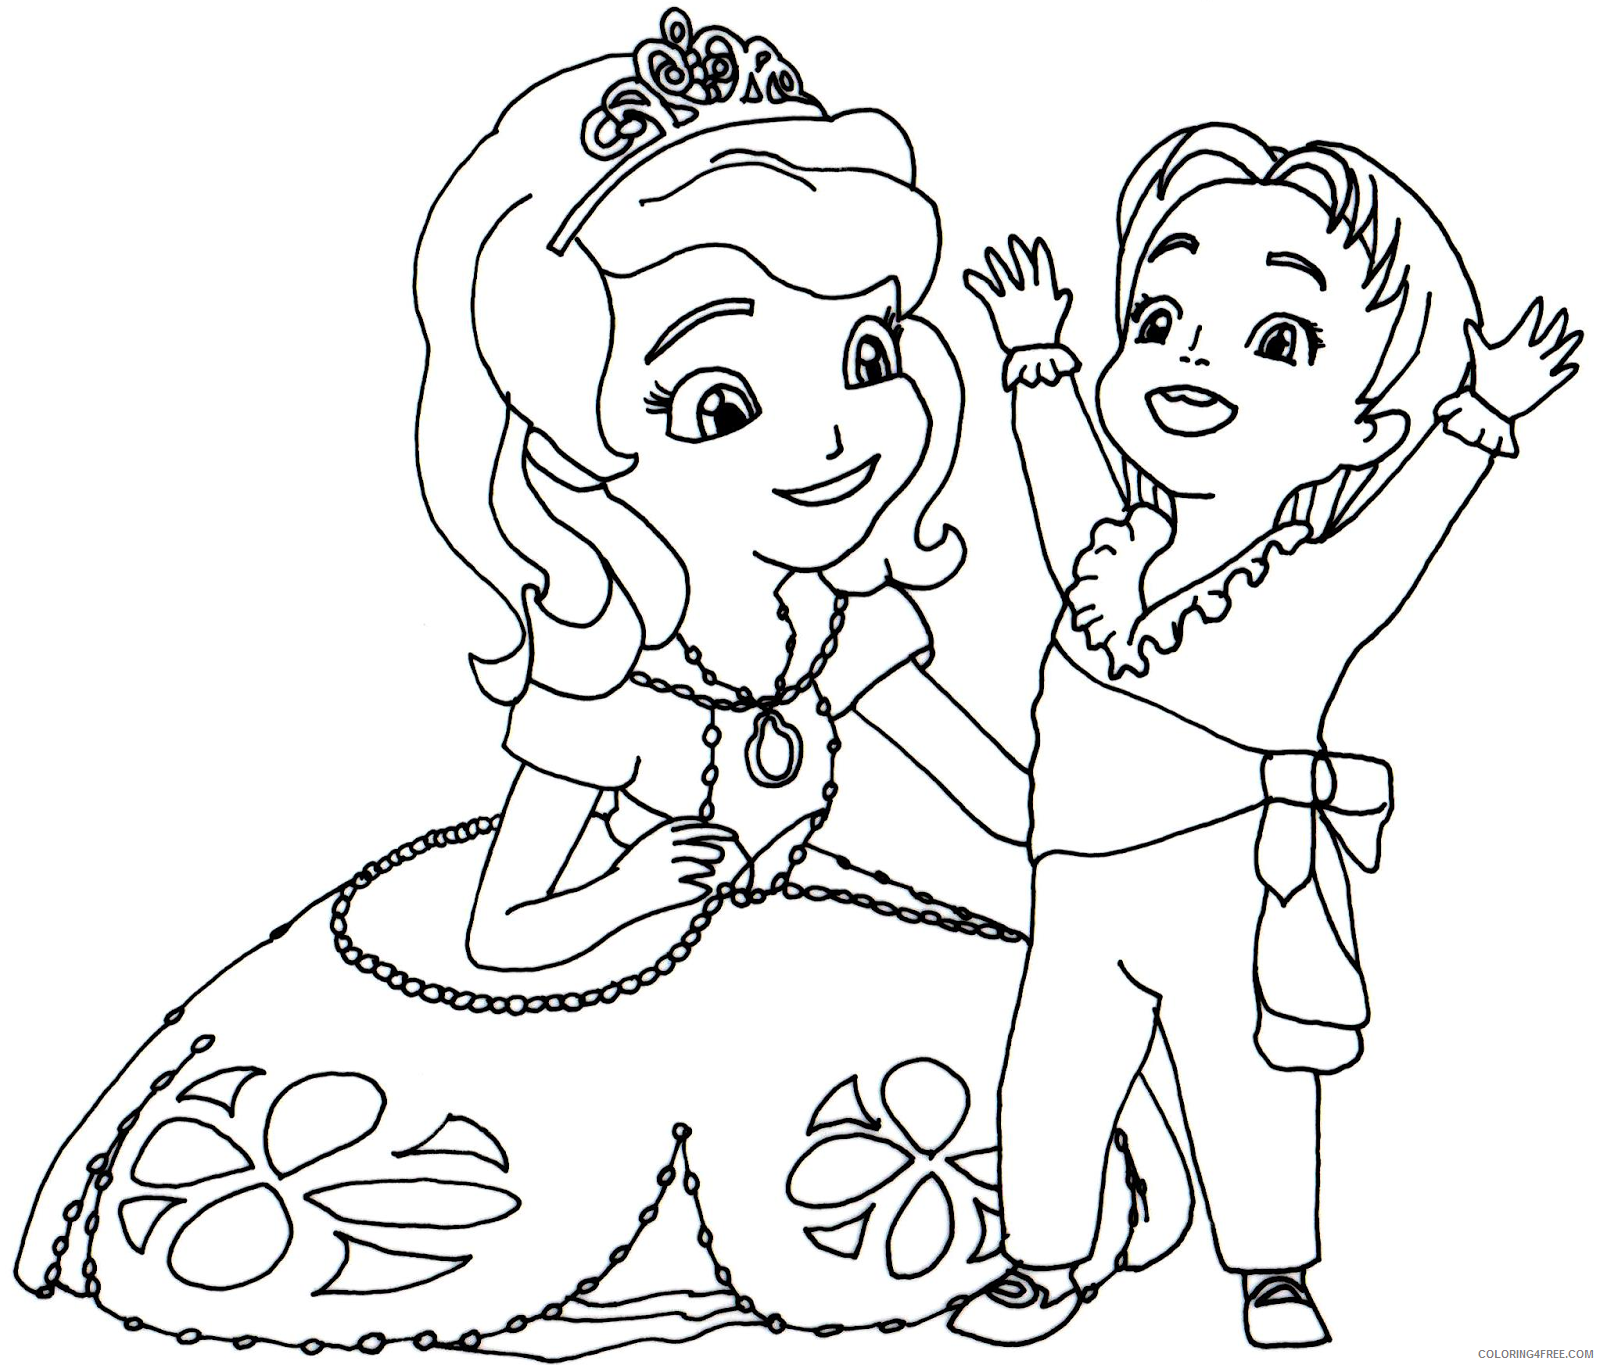 Sofia the First Coloring Pages Cartoons Baby James Sofia the First Printable 2020 5829 Coloring4free